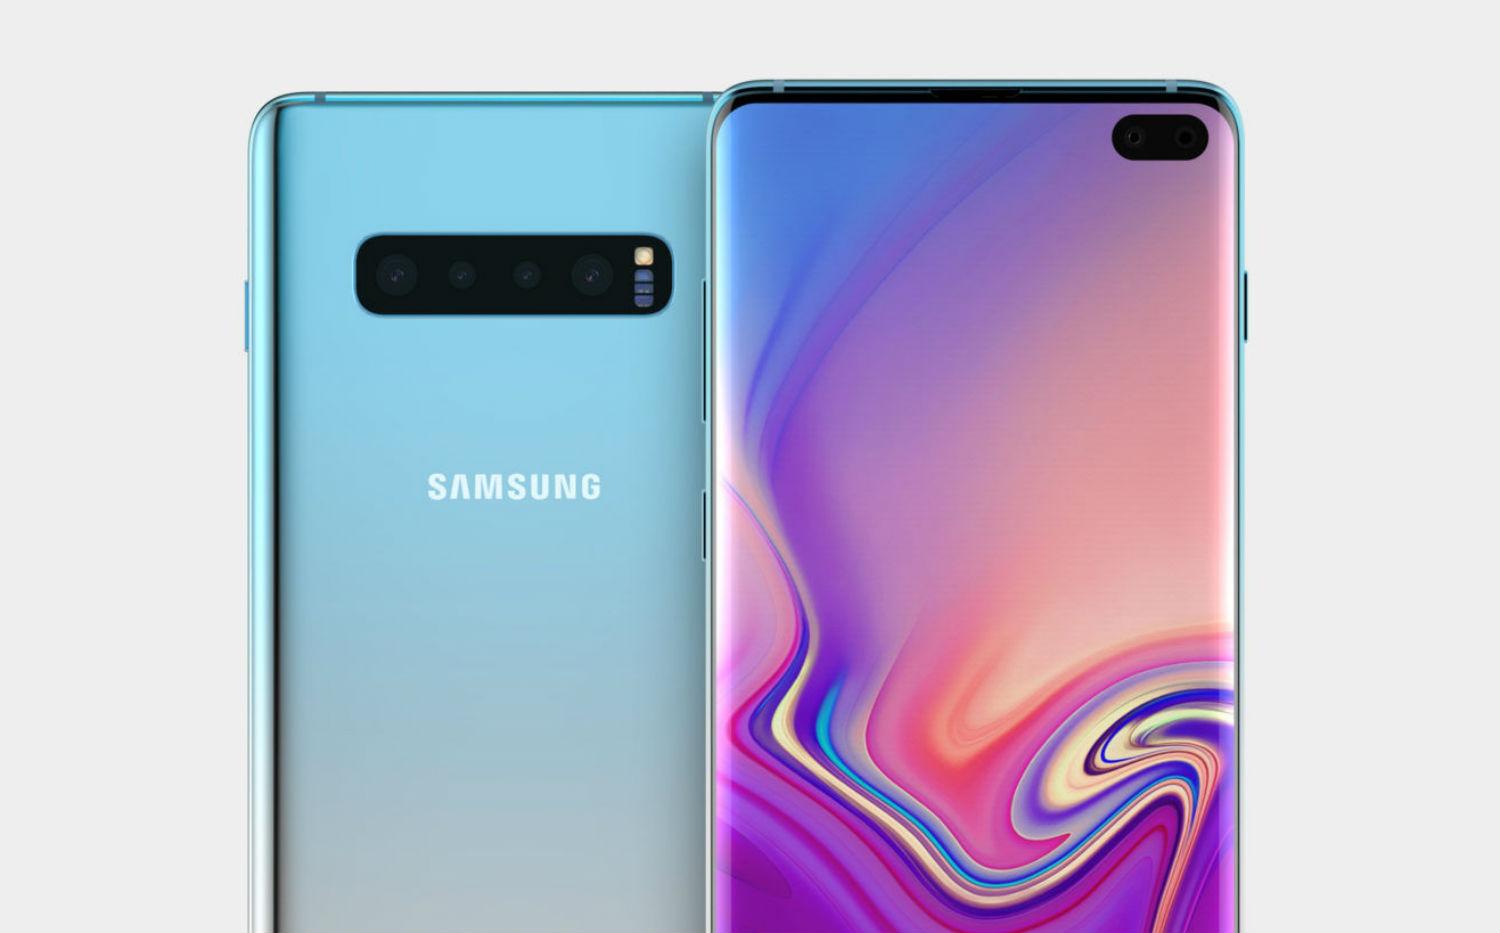  Galaxy S10's Massive Displays Revealed in Alleged Leak